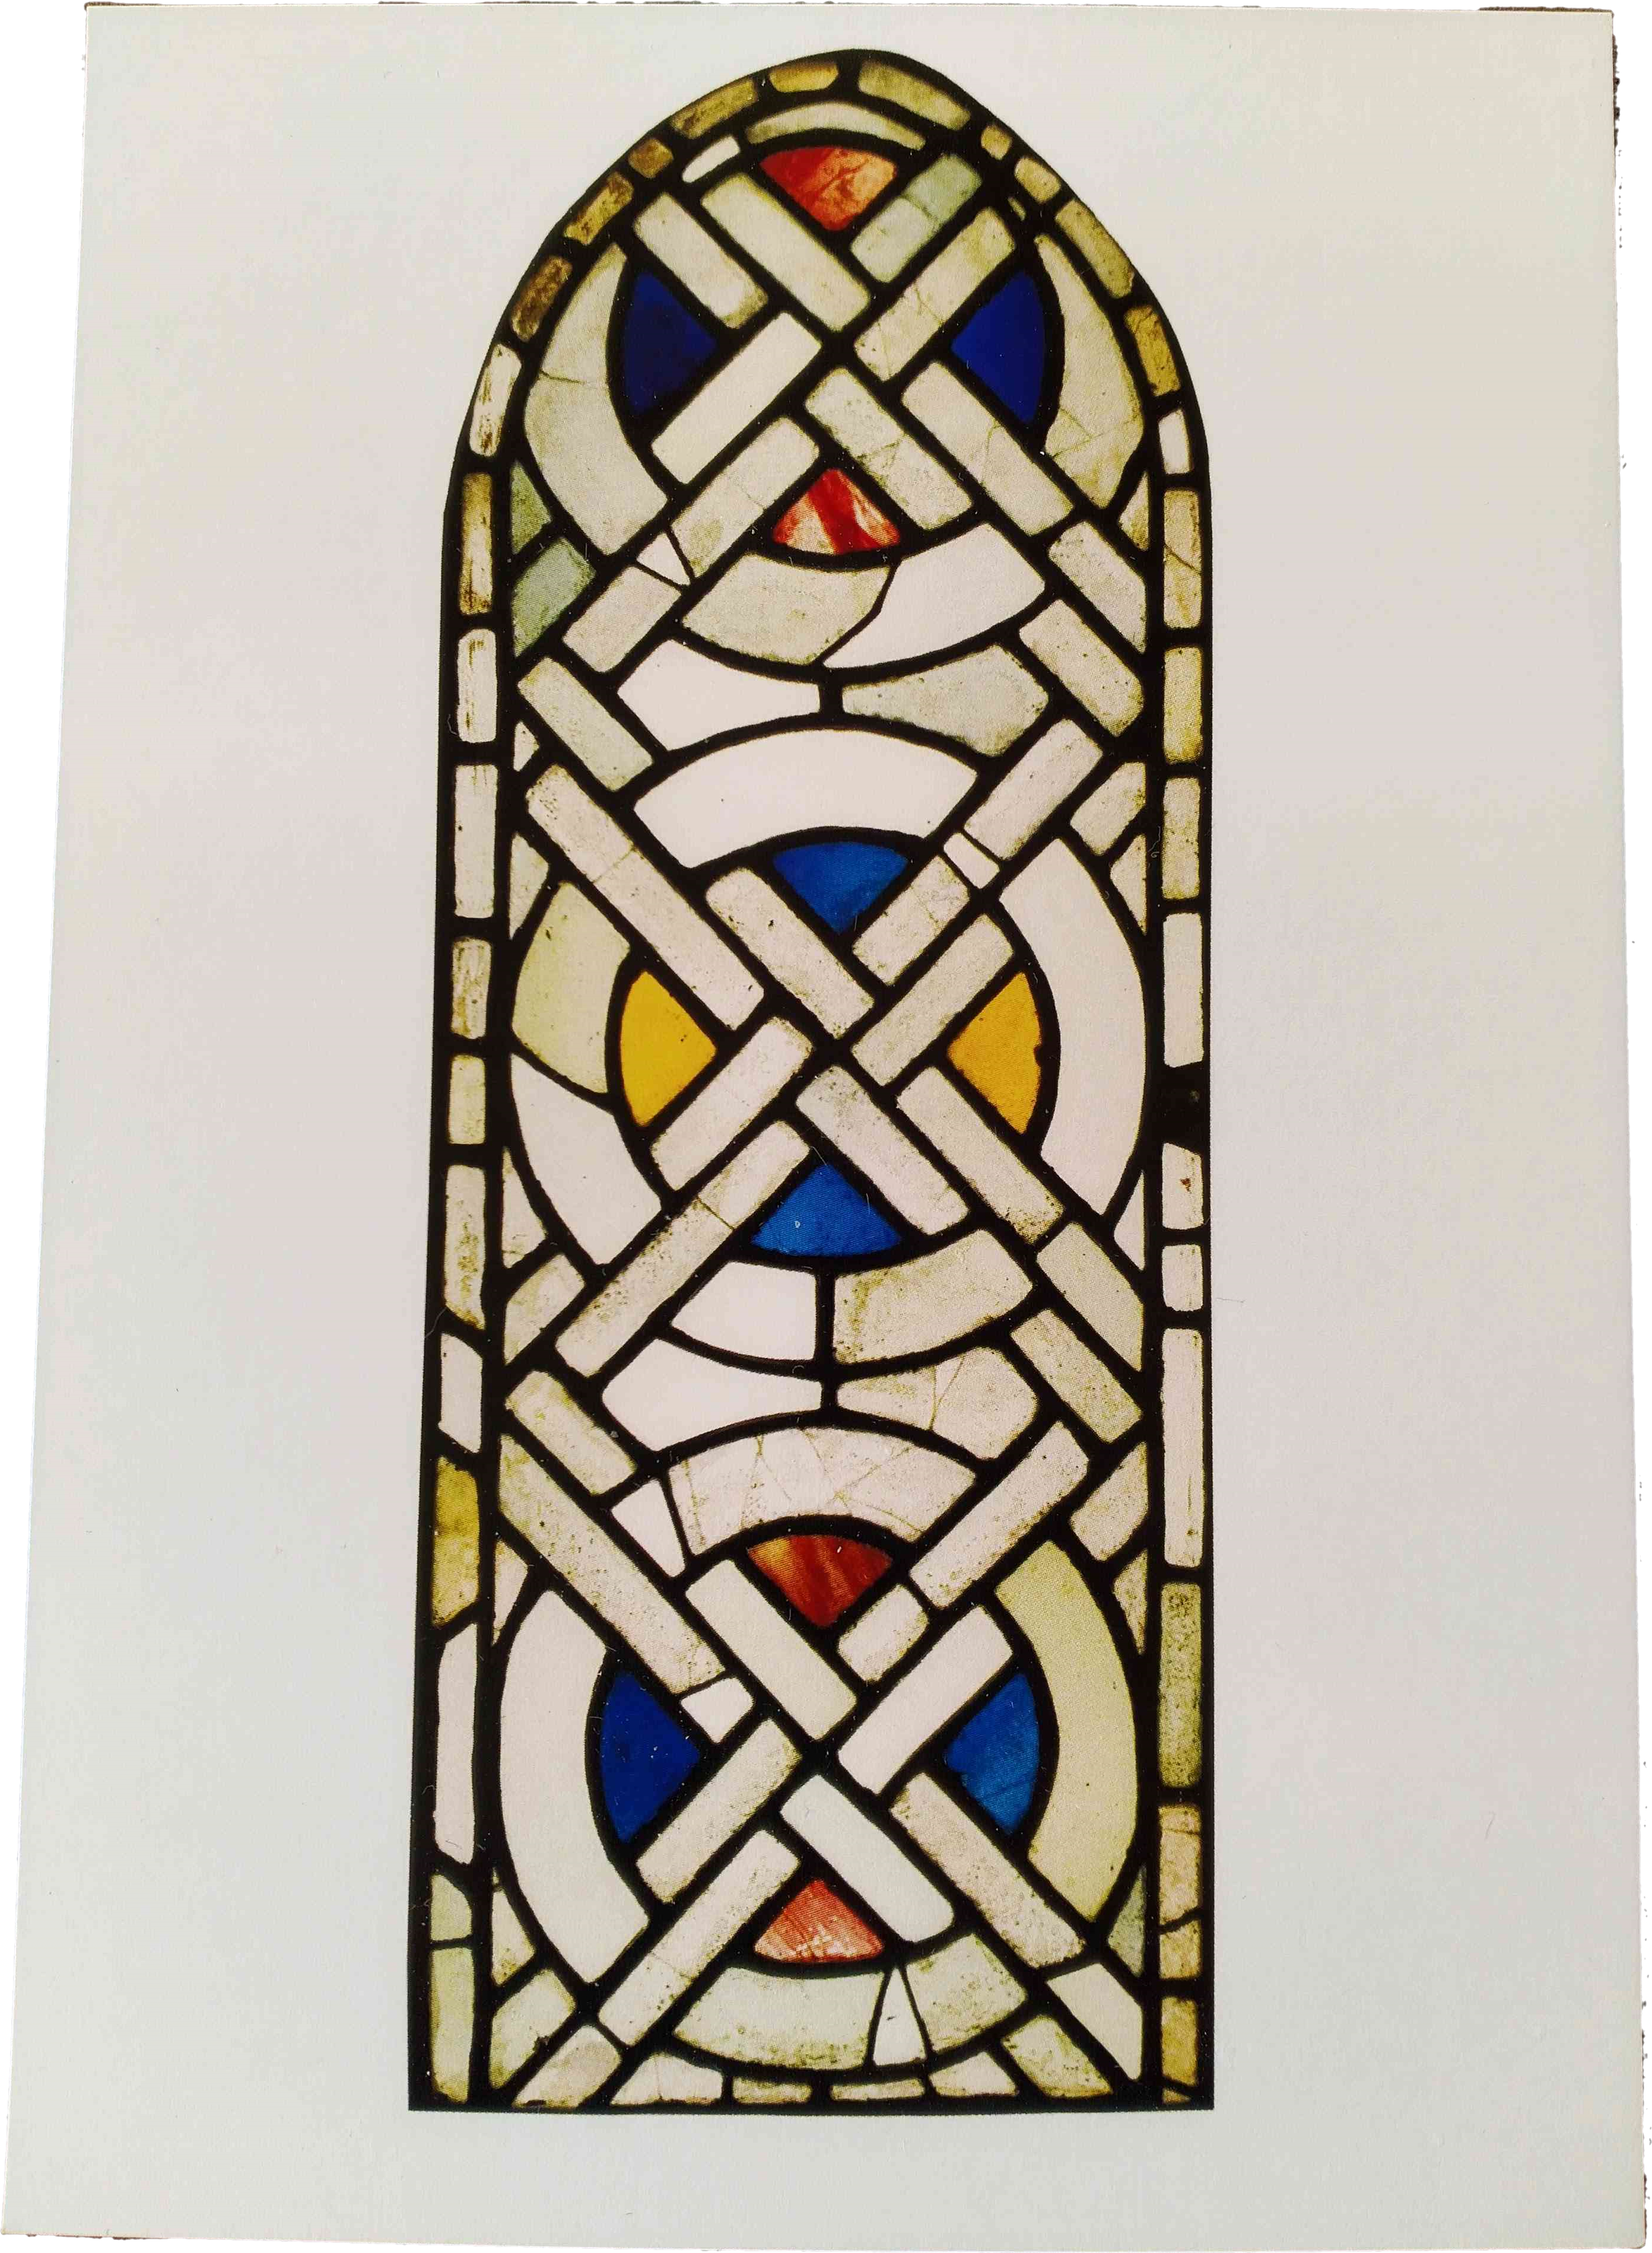 A photograph of a simple stained glass window